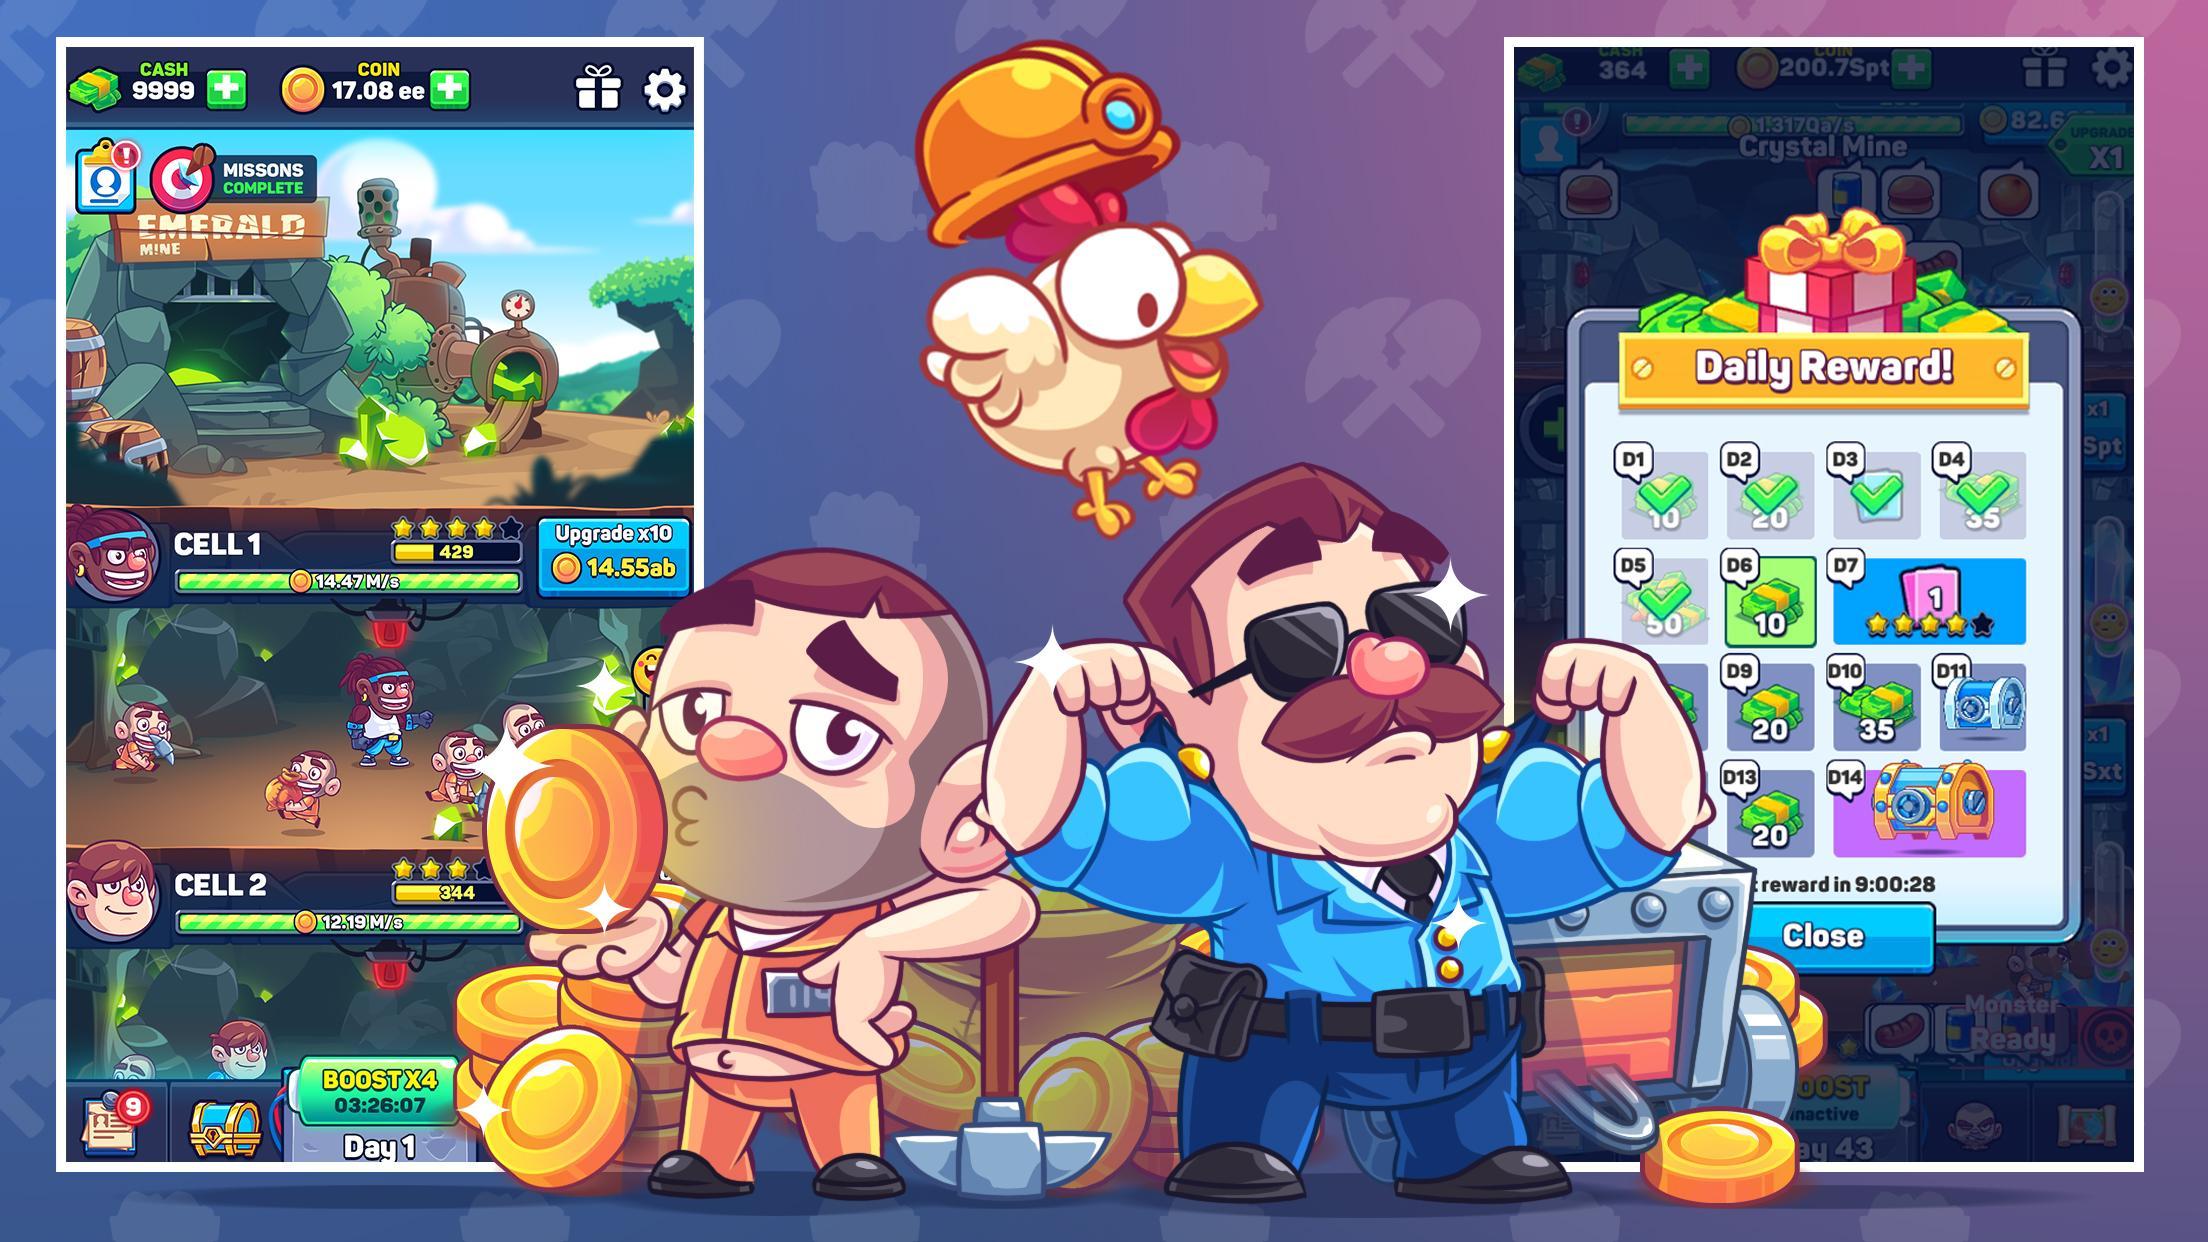 Idle Prisoner Inc Mine Crafting Building For Android Apk